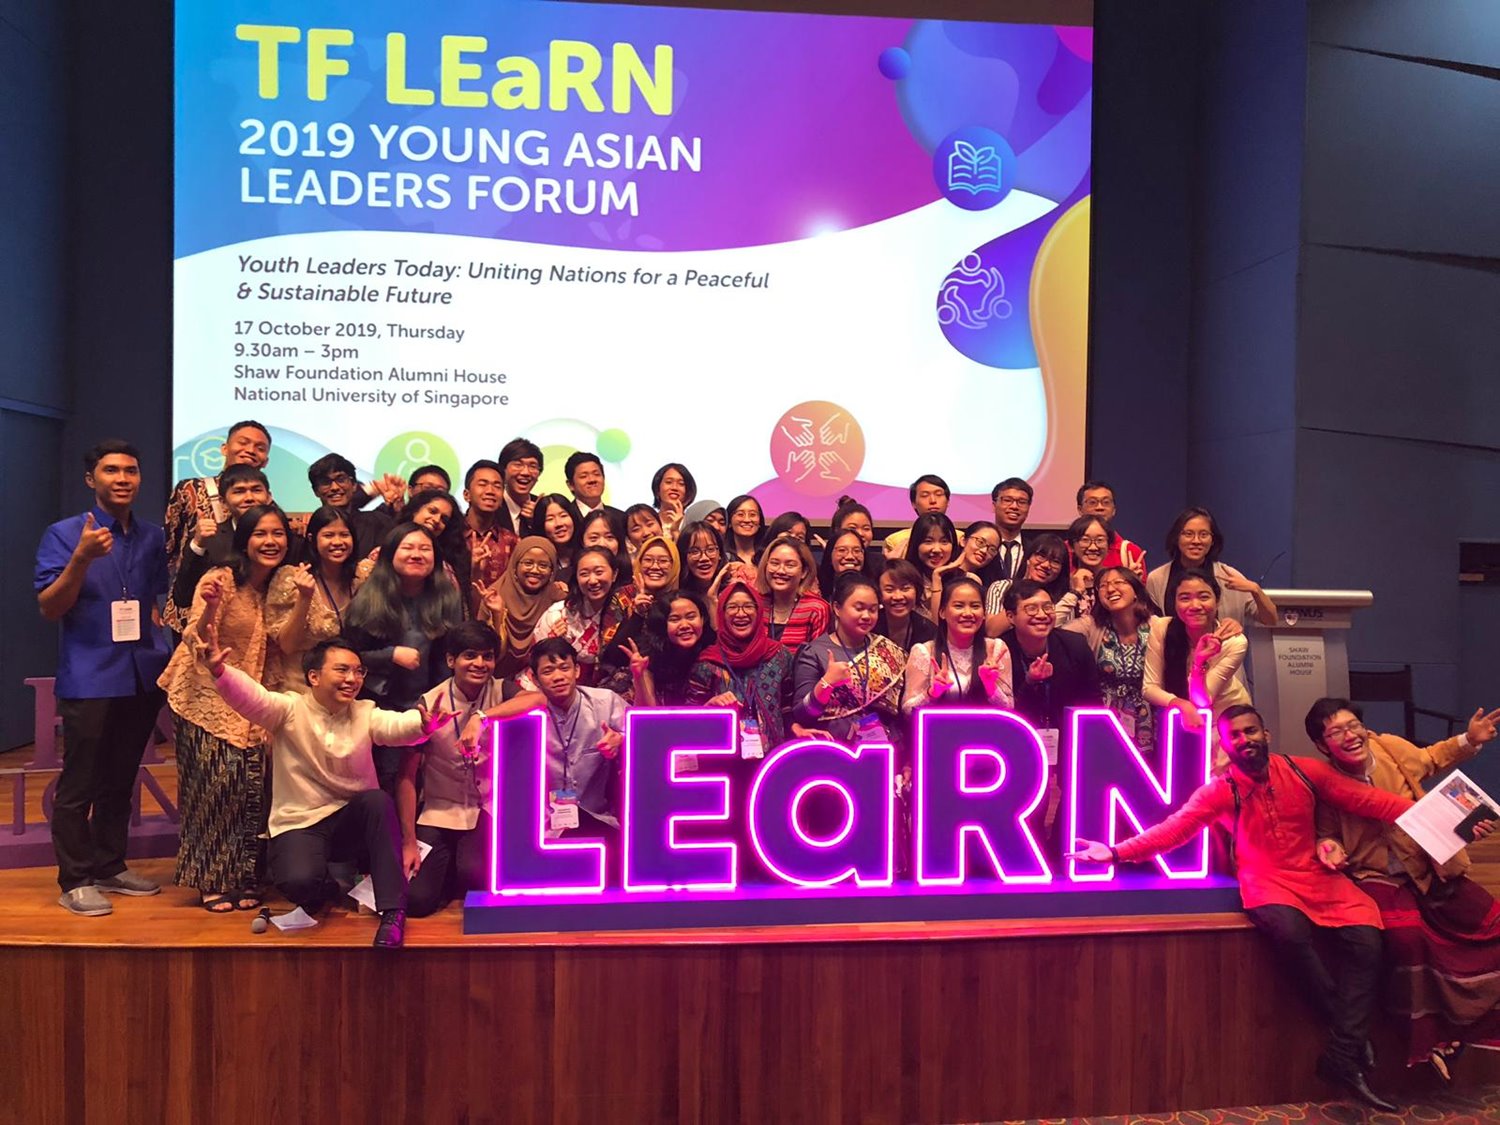 Sharing Learning Journeys at TF LEaRN 2019 Young Asian Leaders Forum